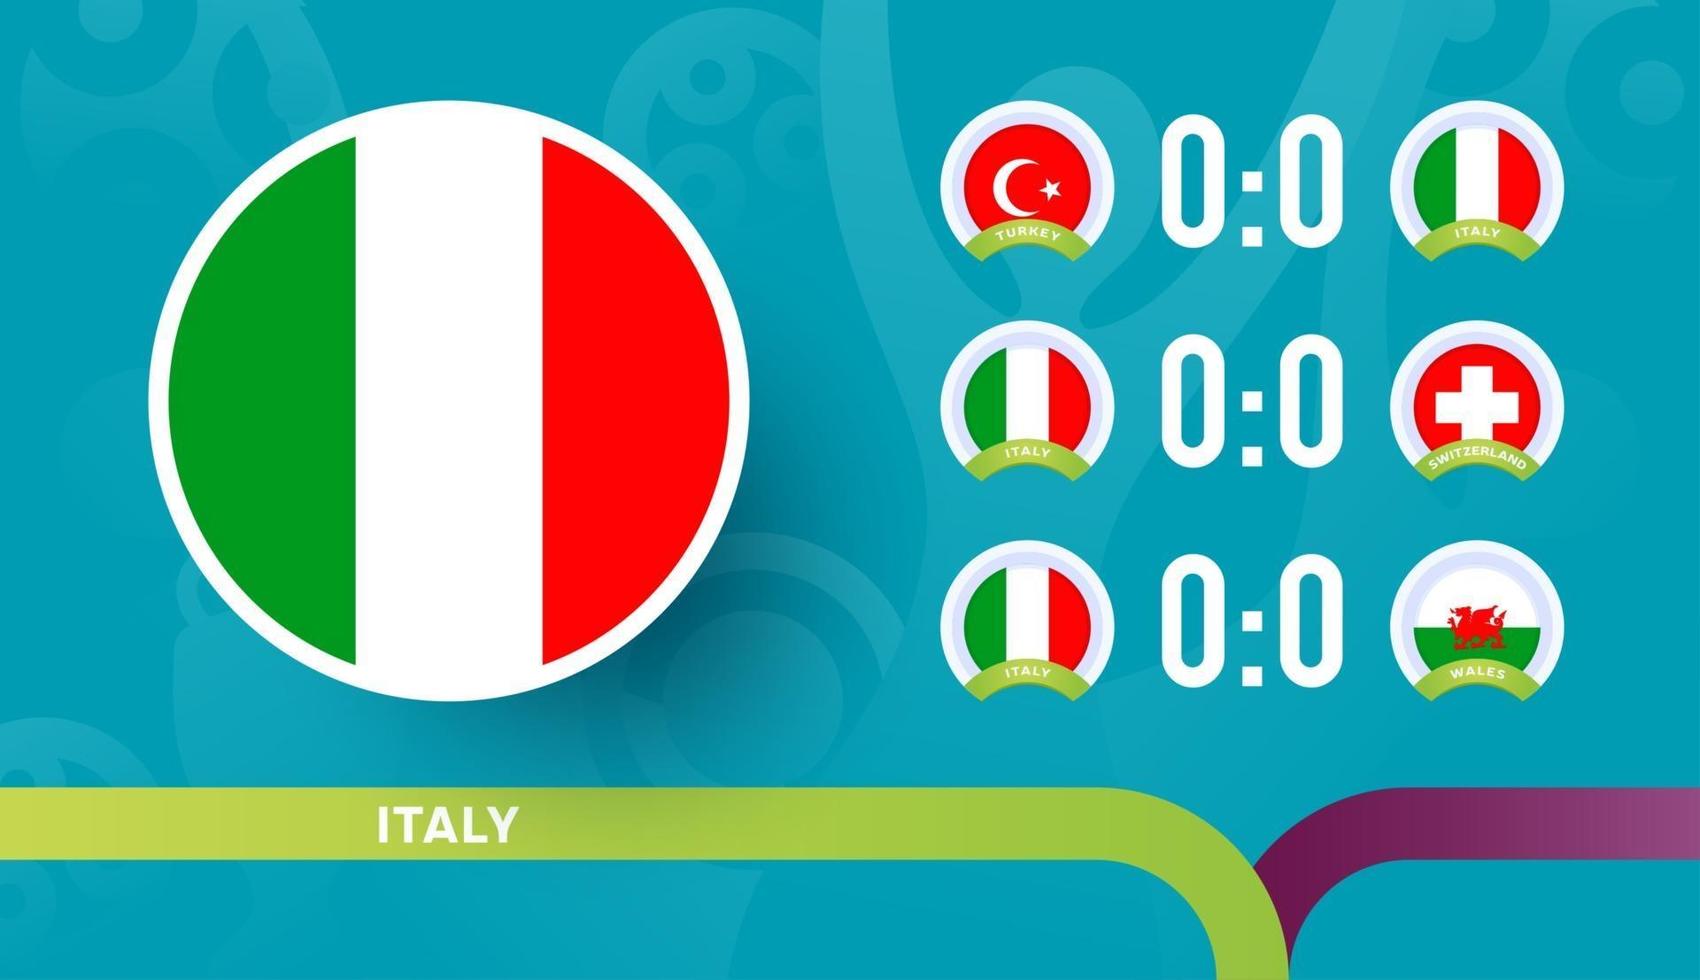 italy national team Schedule matches in the final stage at the 2020 Football Championship. Vector illustration of football 2020 matches.